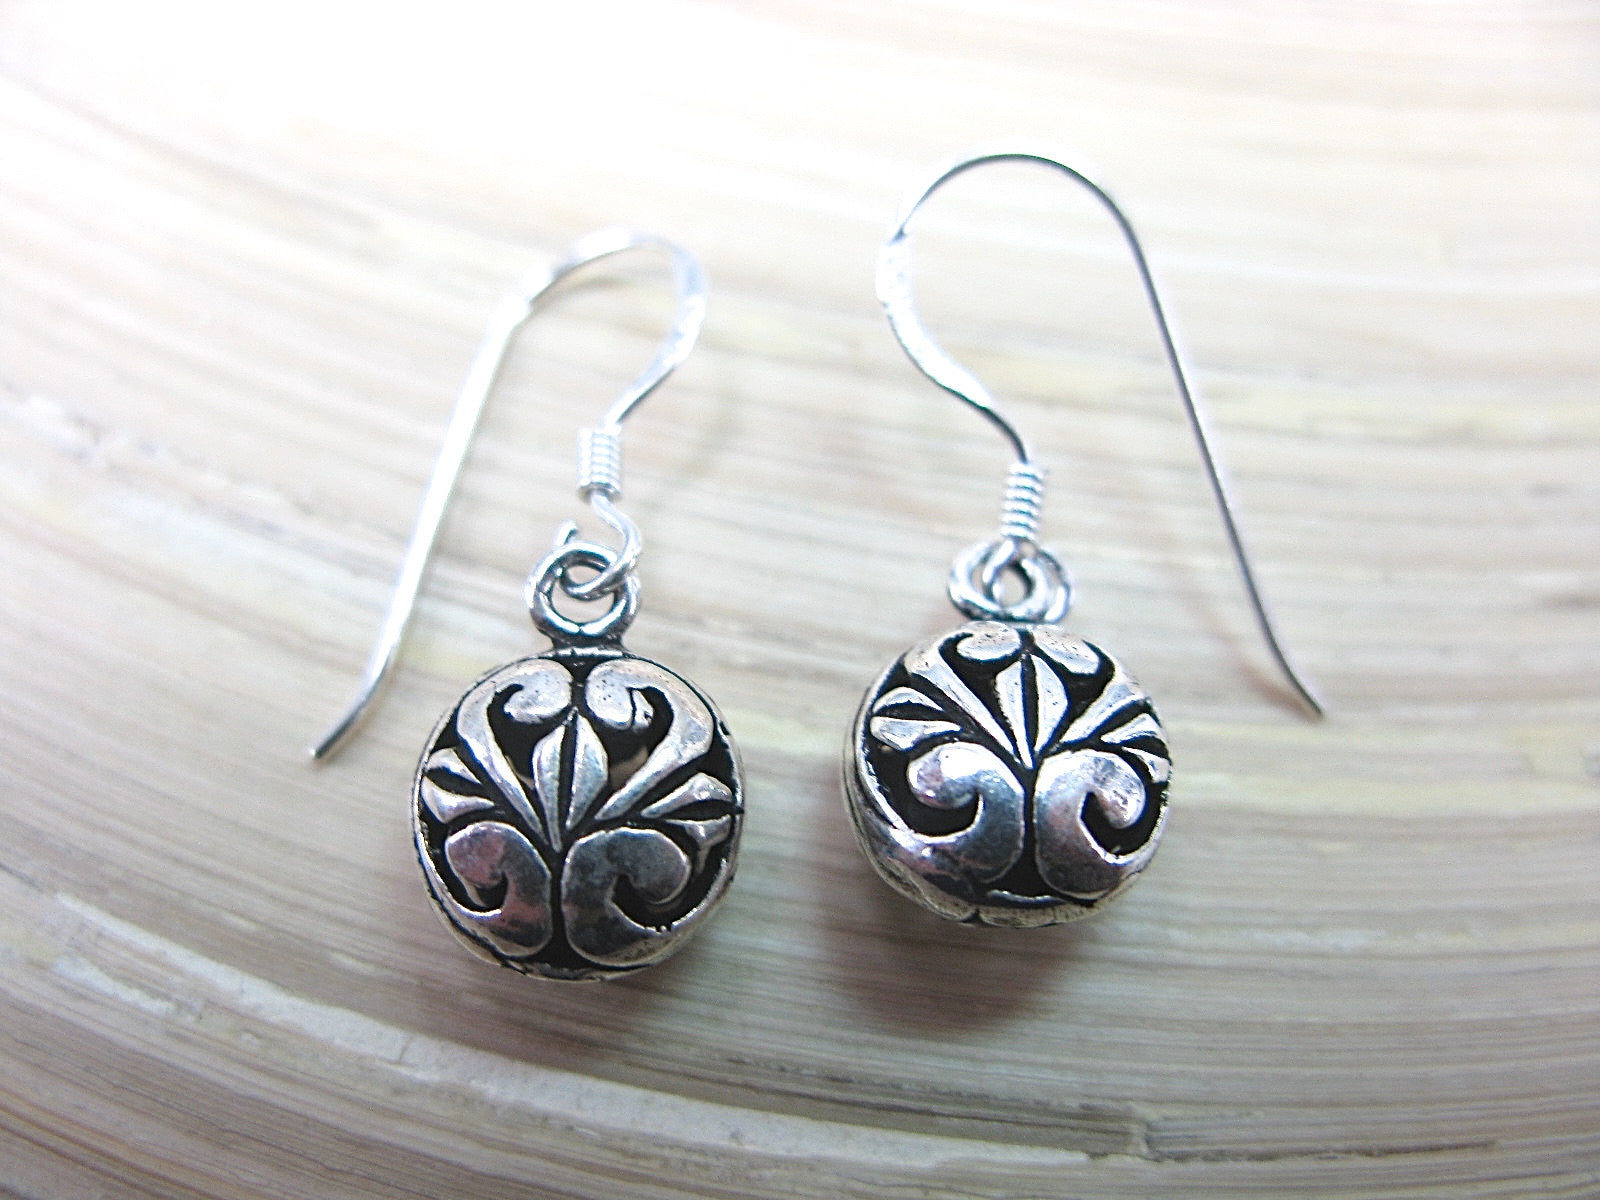 Round Circel Filigree Lace Oxidized Earrings in 925 Sterling Silver Earrings Faith Owl - Faith Owl